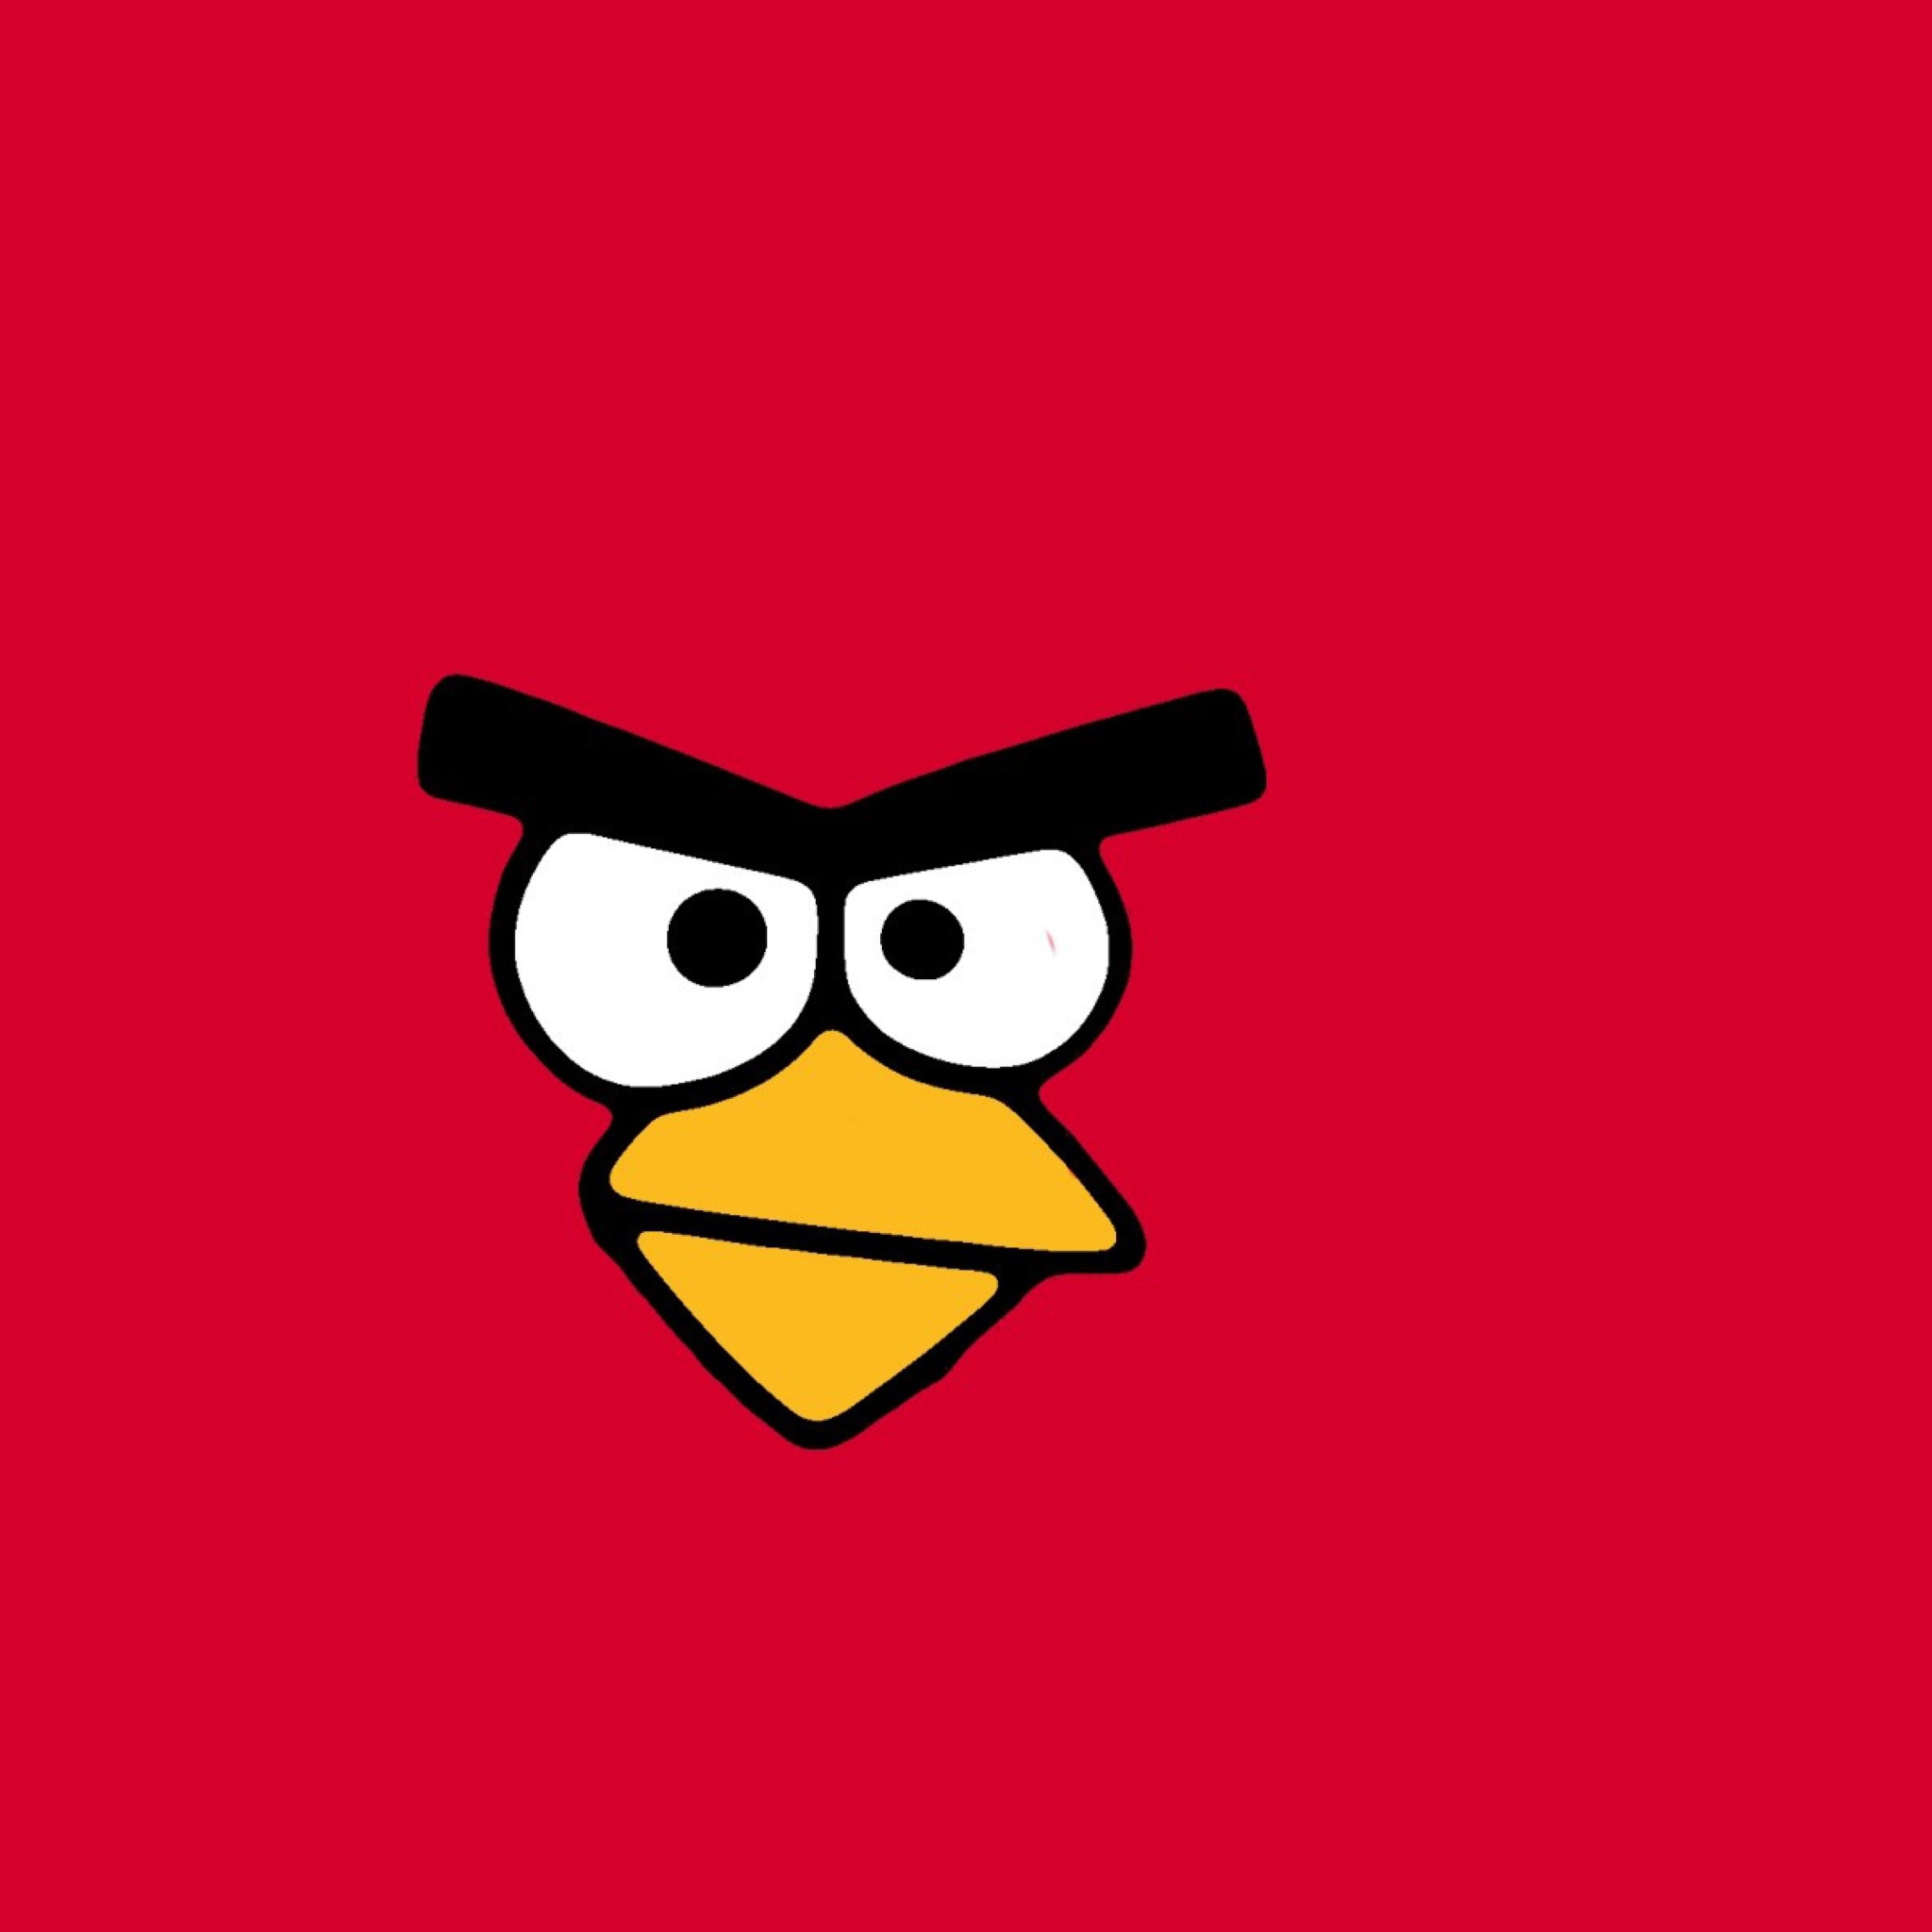 Red Angry Bird wallpaper 2048x2048